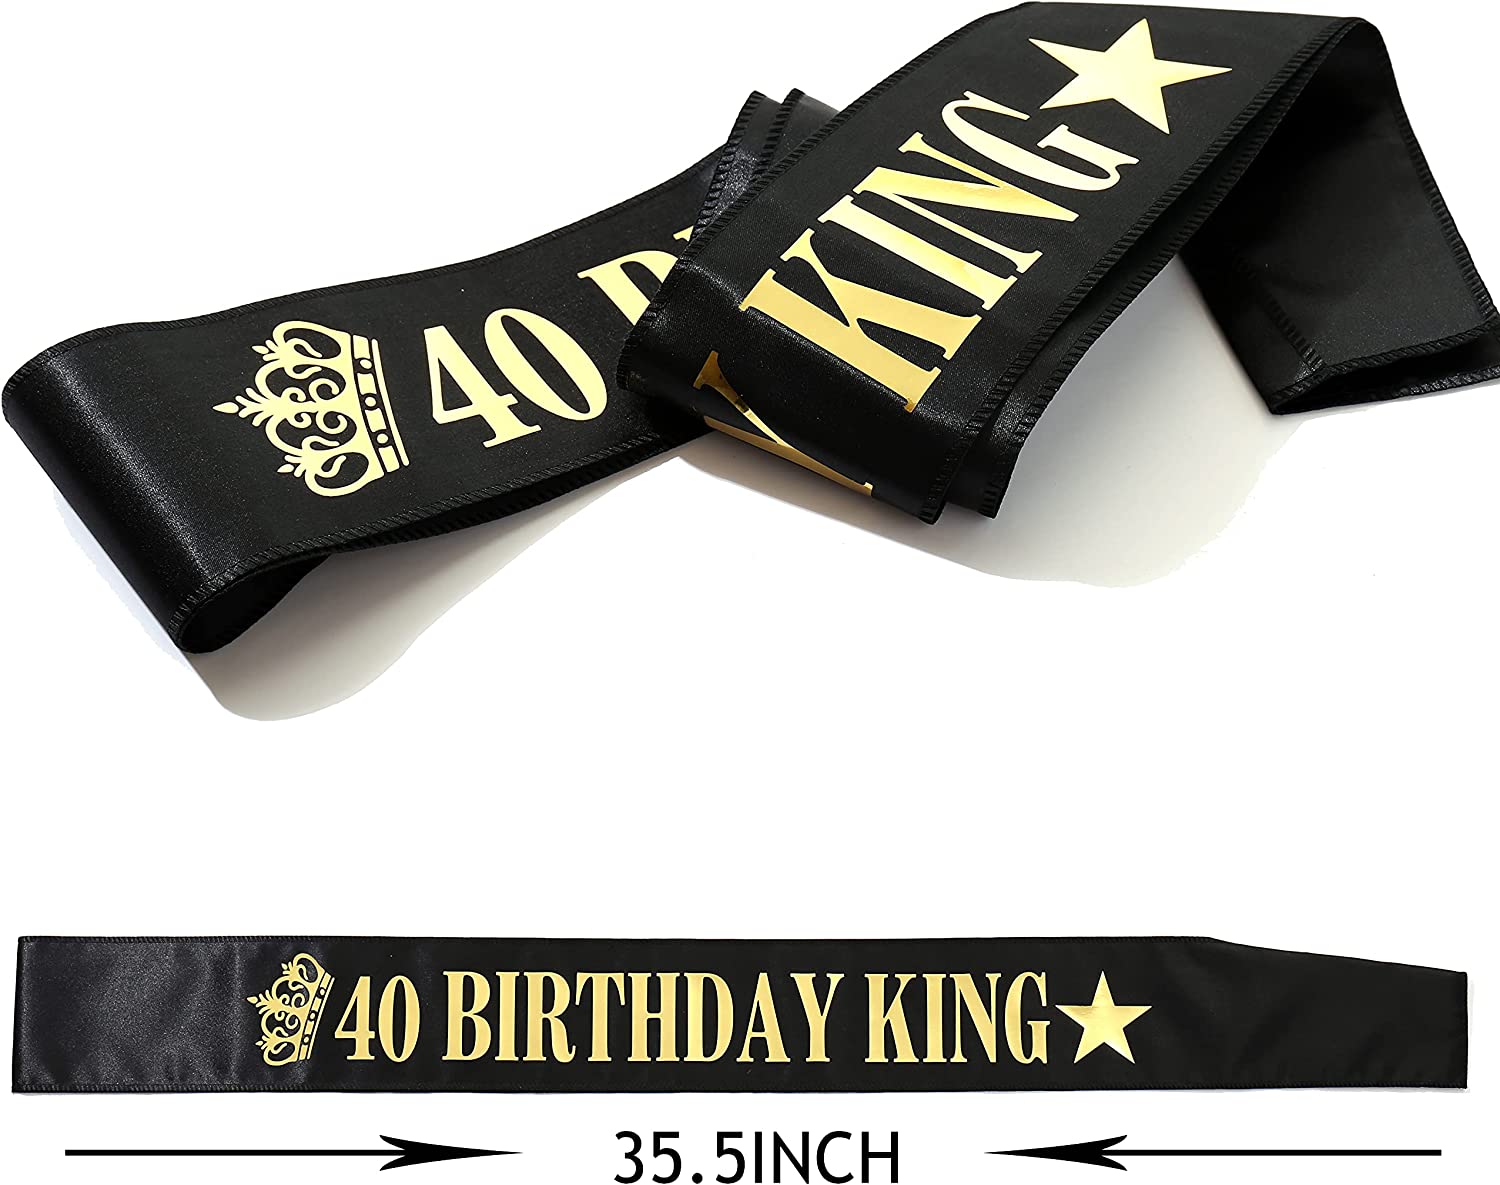 40th Birthday Crown and Birthday King Sash,40th Birthday Gifts for Men,Birthday Gift Idea for Him, Husband, Father, Brother Friends Party Favors.40th Birthday Decorations